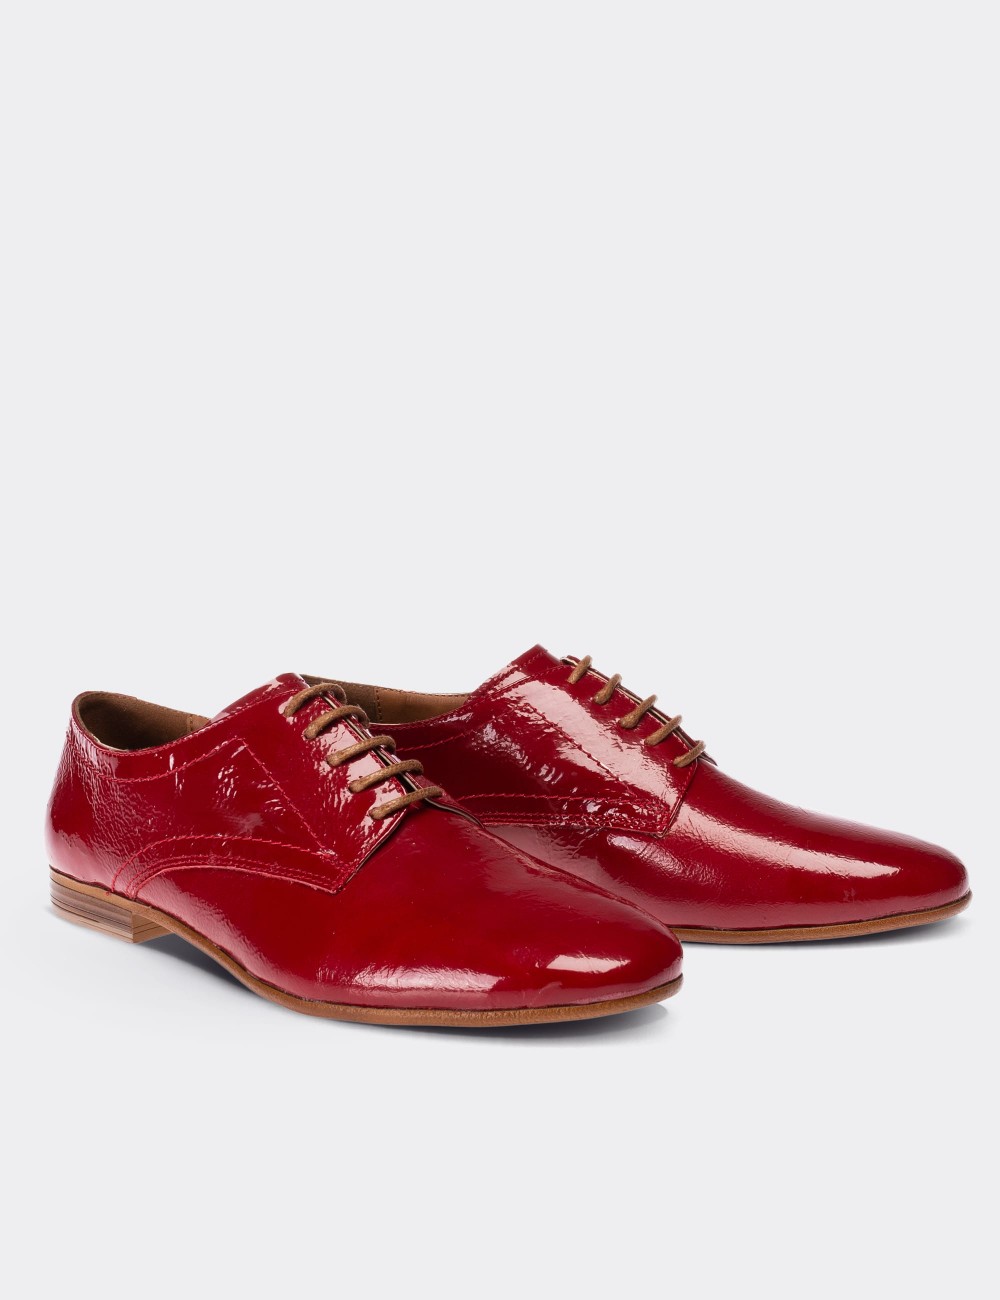 Red Patent Leather Lace-up Shoes 36 Numara